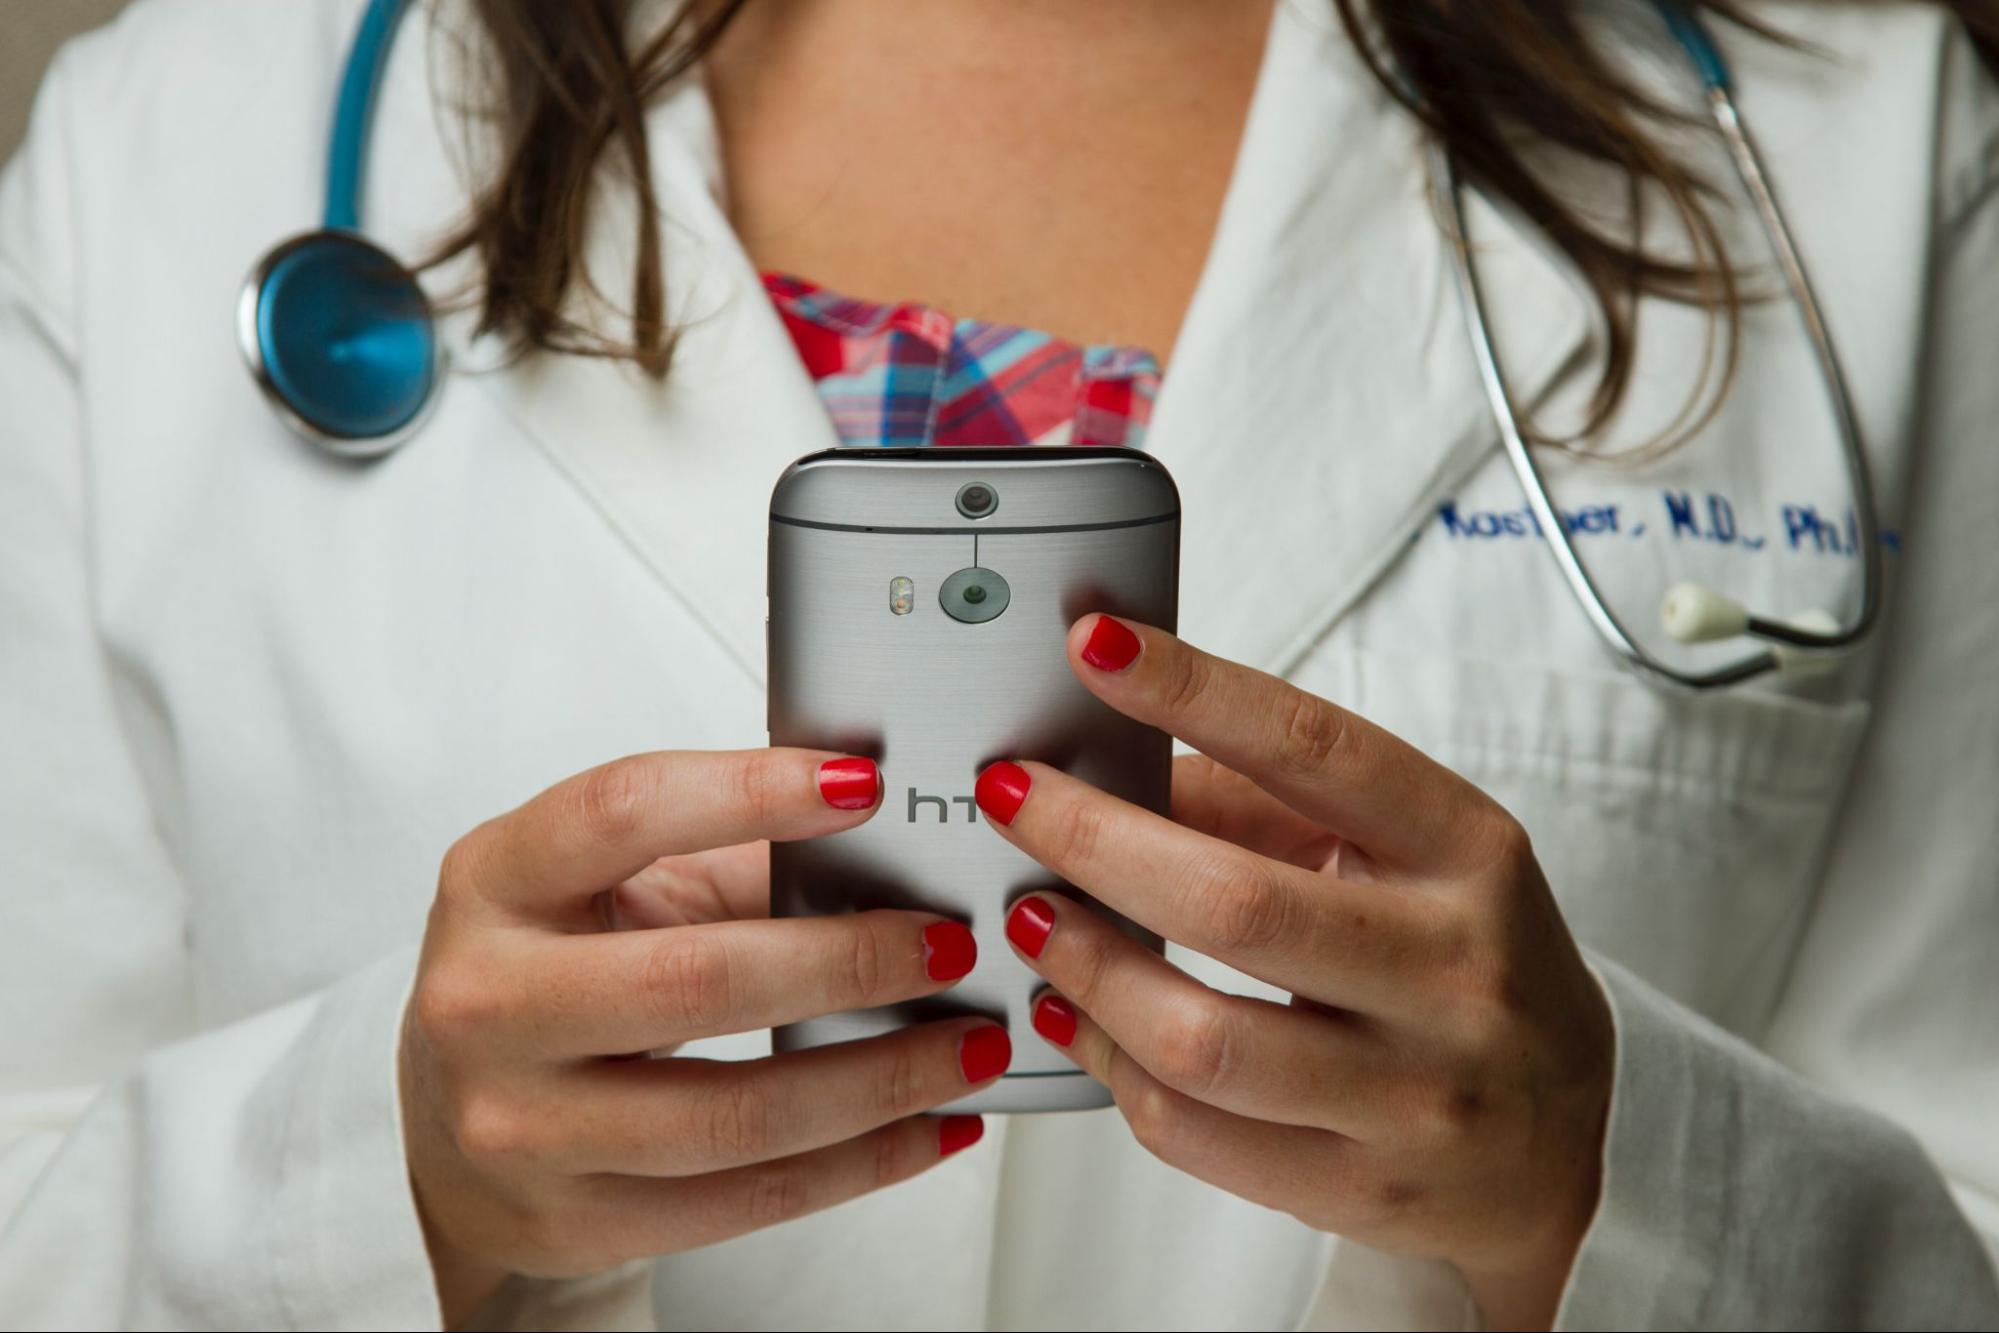 a doctor in a white lab coat wearing a stethoscope is using a cell phone to deliver telemedicine. Her fingernails are painted